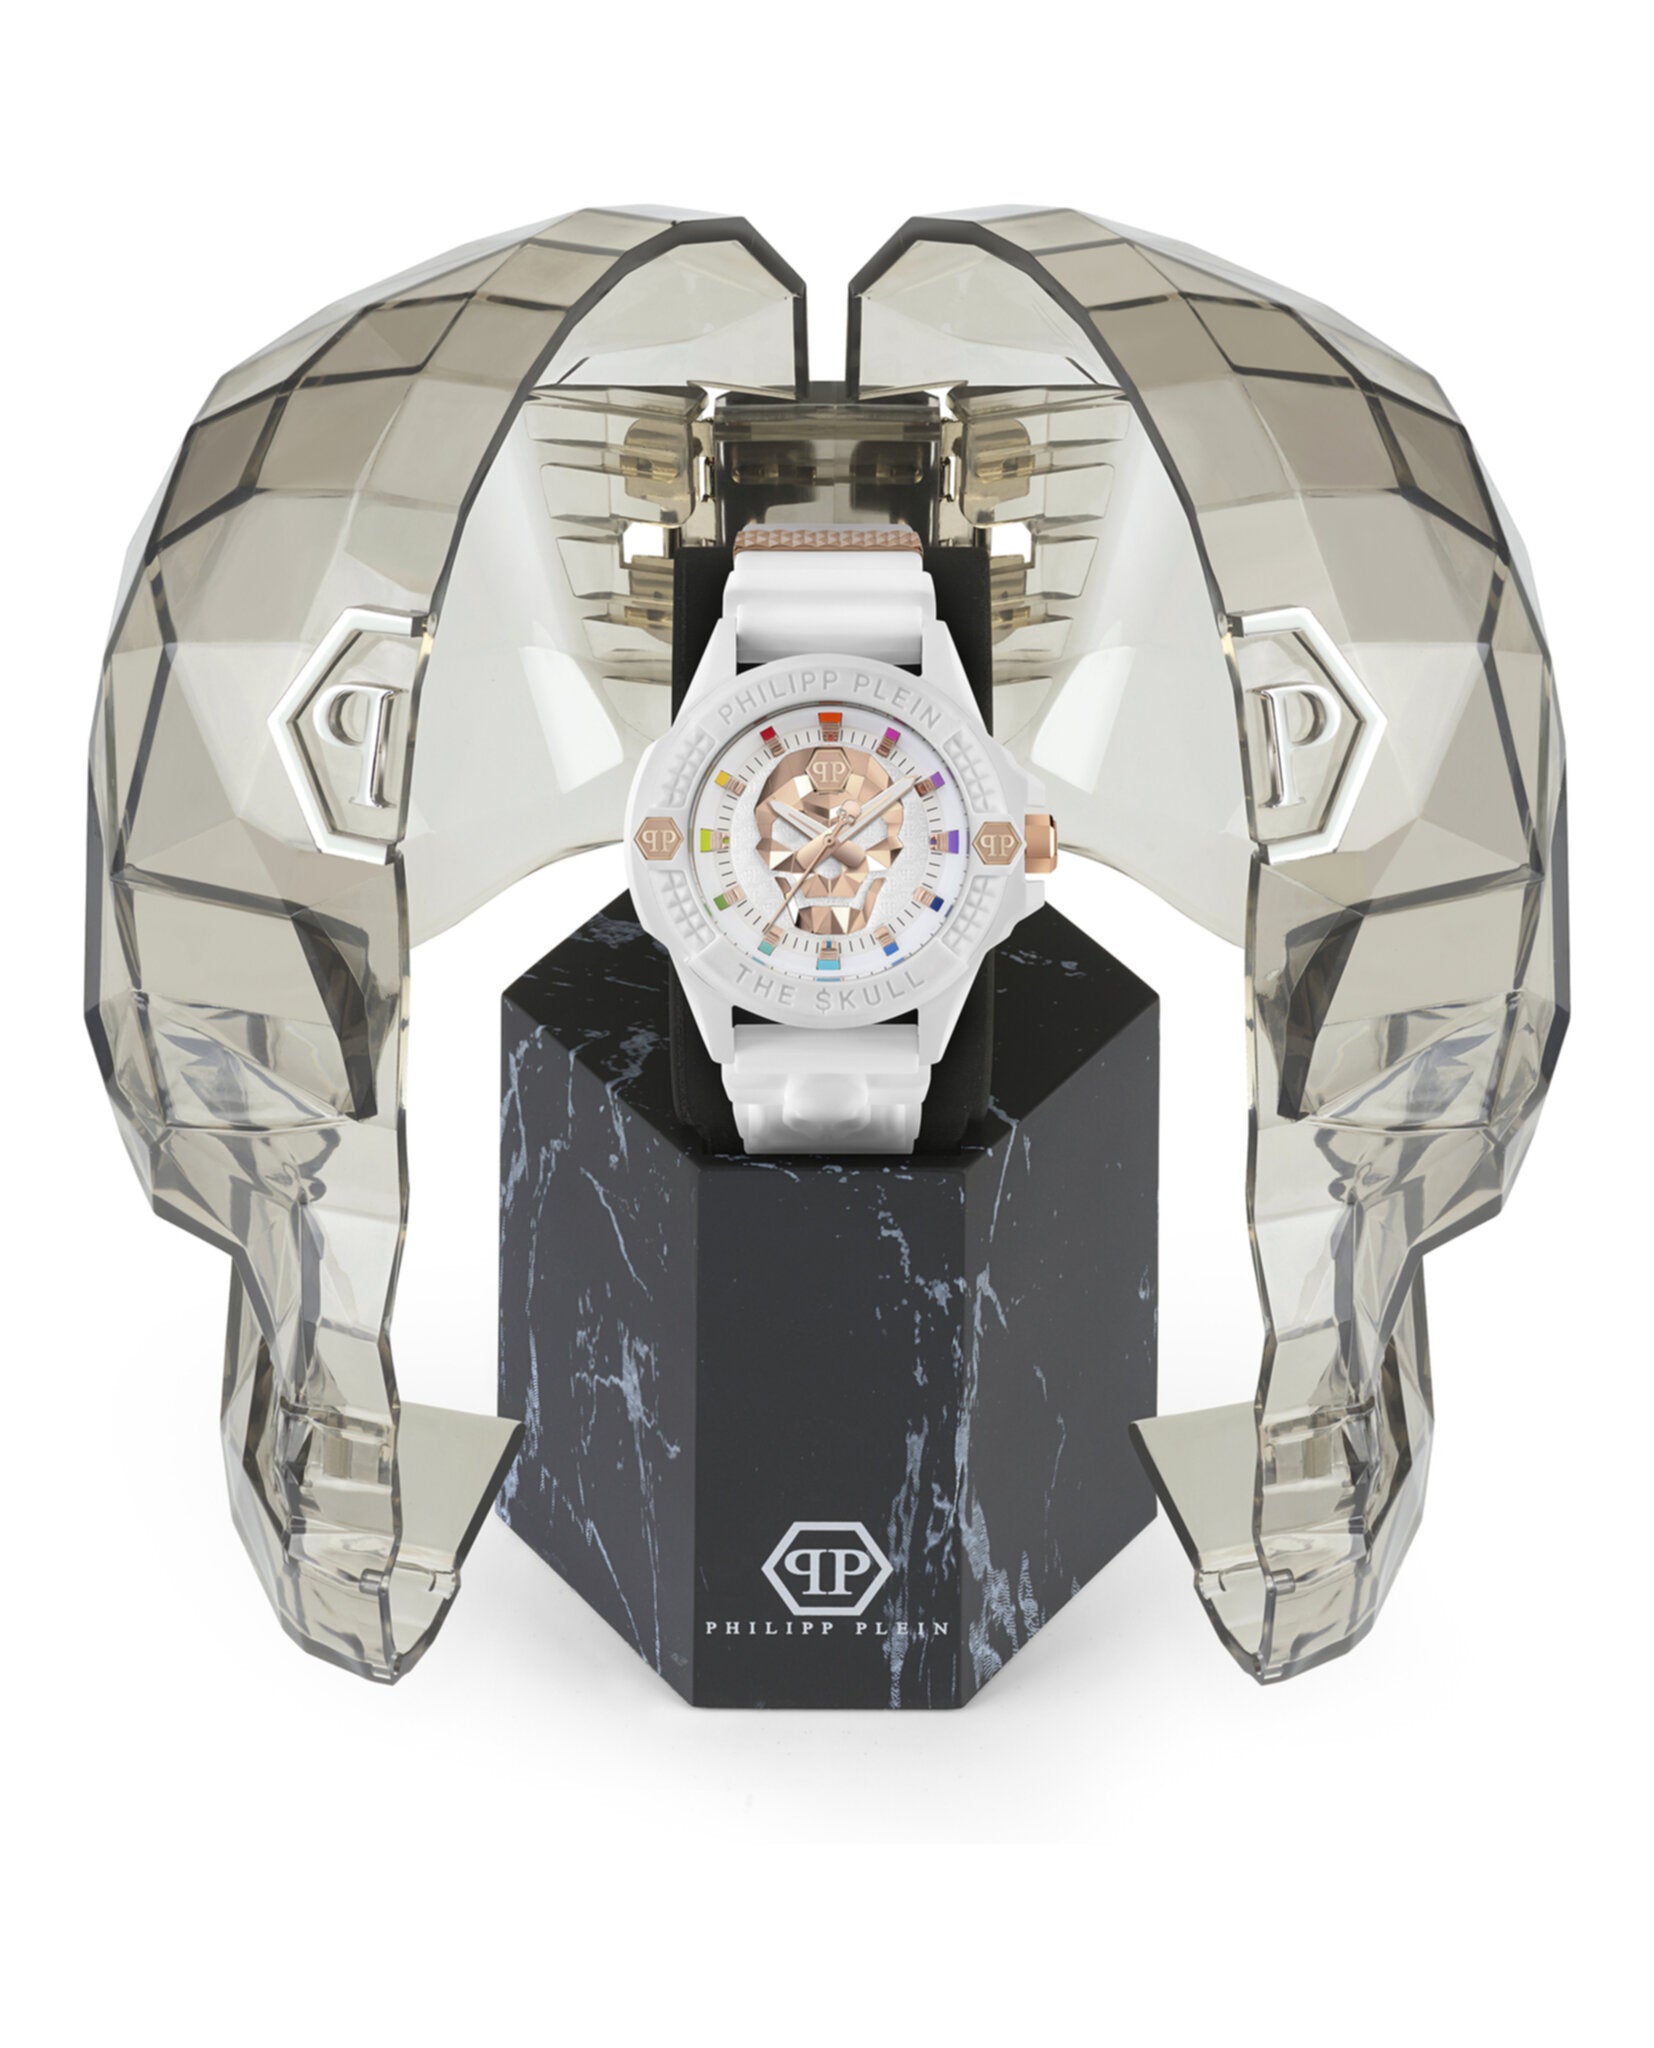 The $kull Ecoceramic Silicone Watch